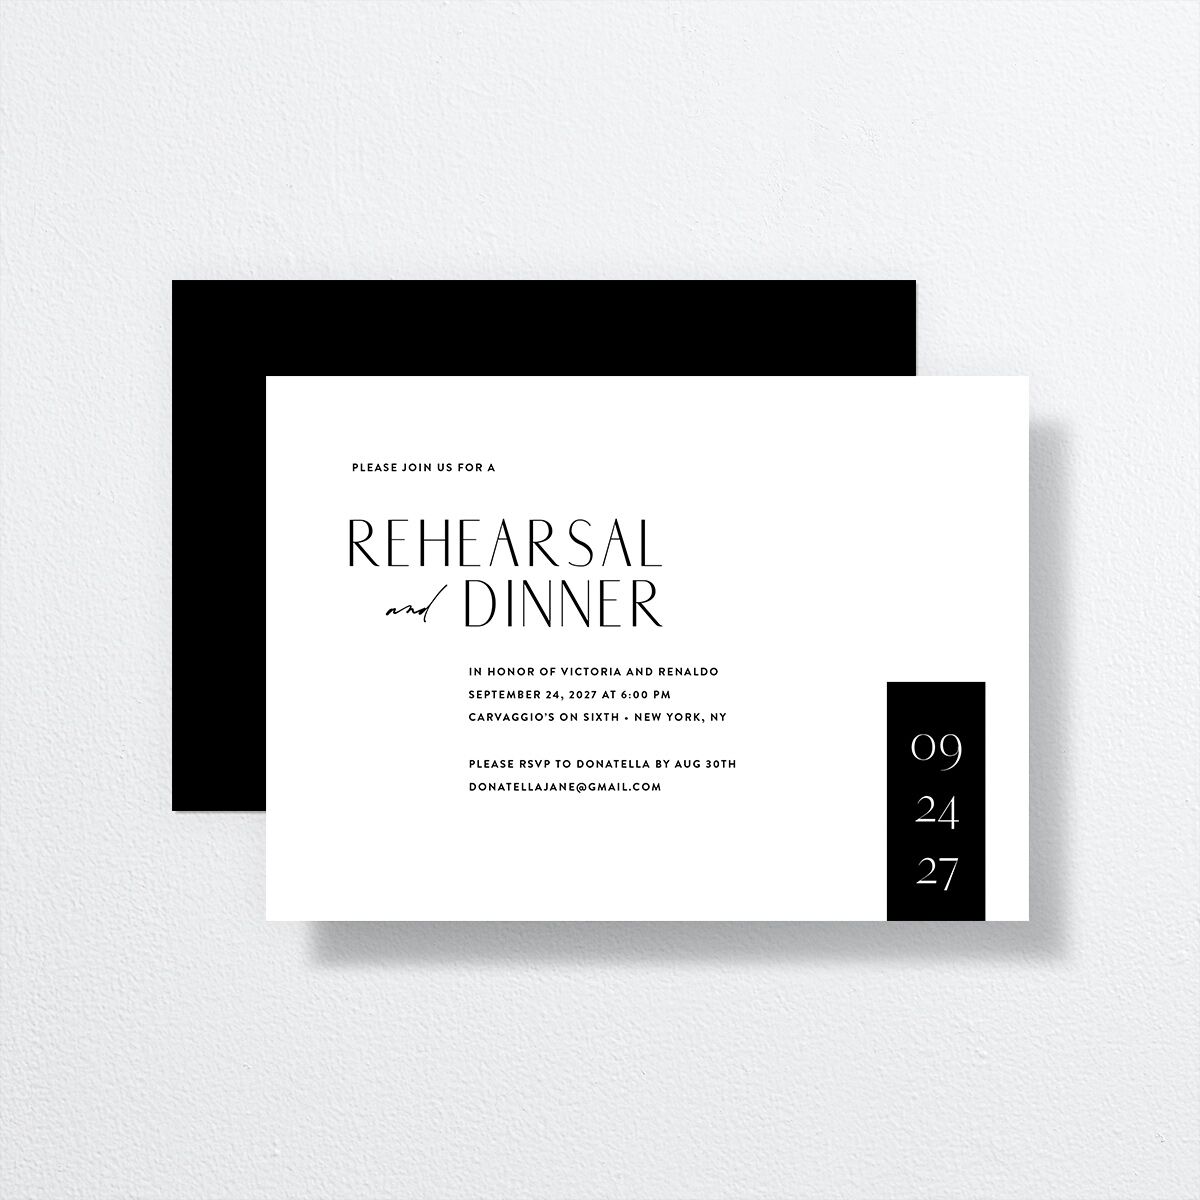 Our Time Rehearsal Dinner Invitations by Vera Wang front-and-back in White